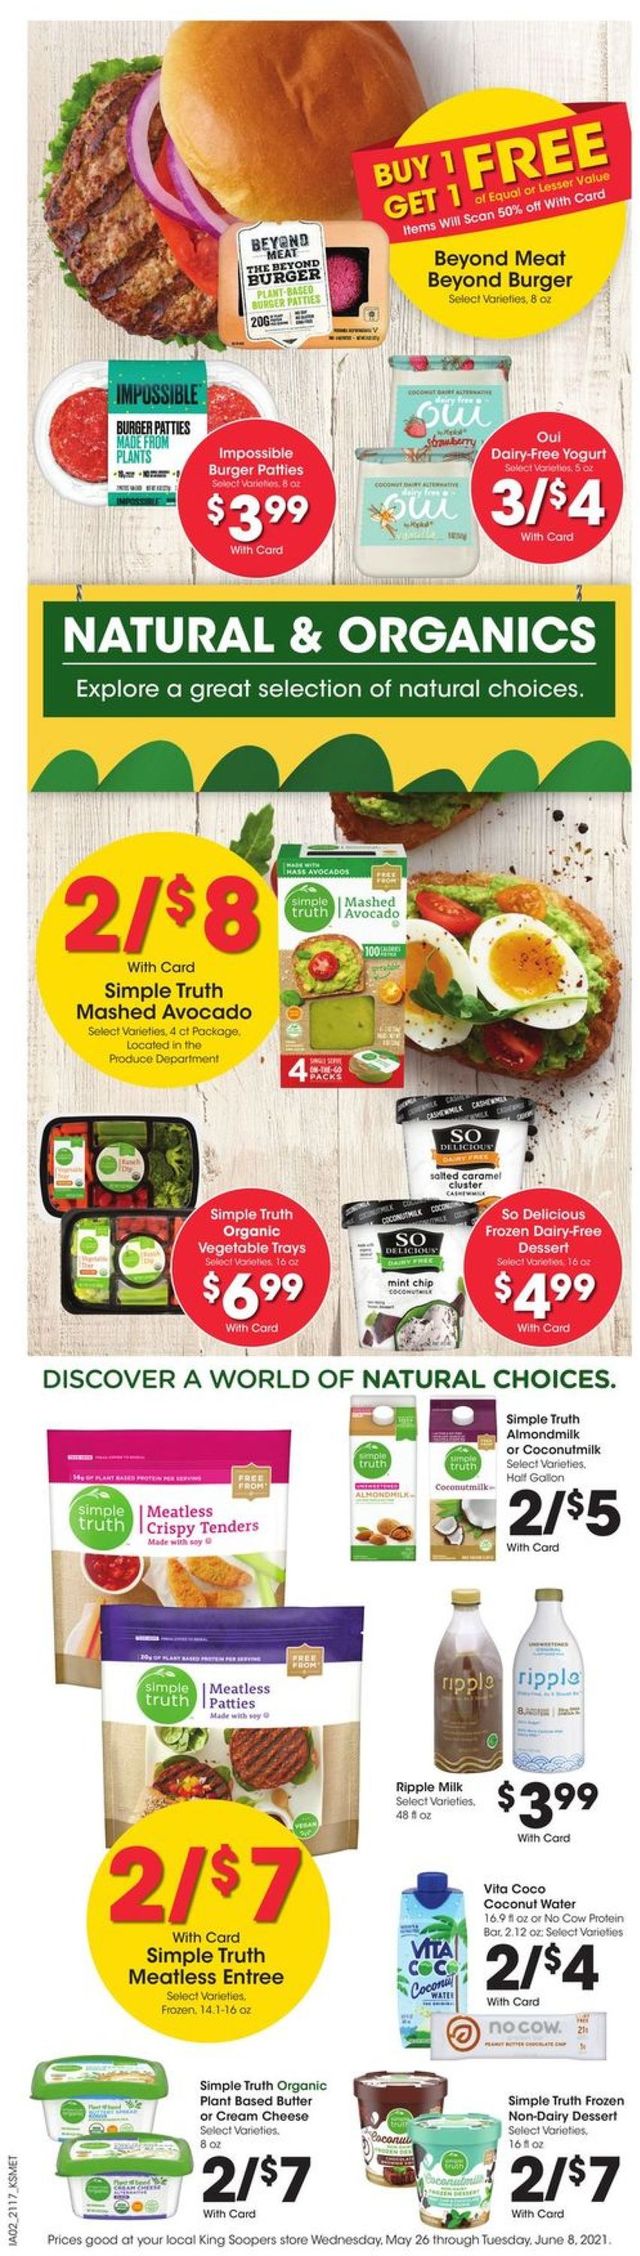 King Soopers Ad from 06/02/2021